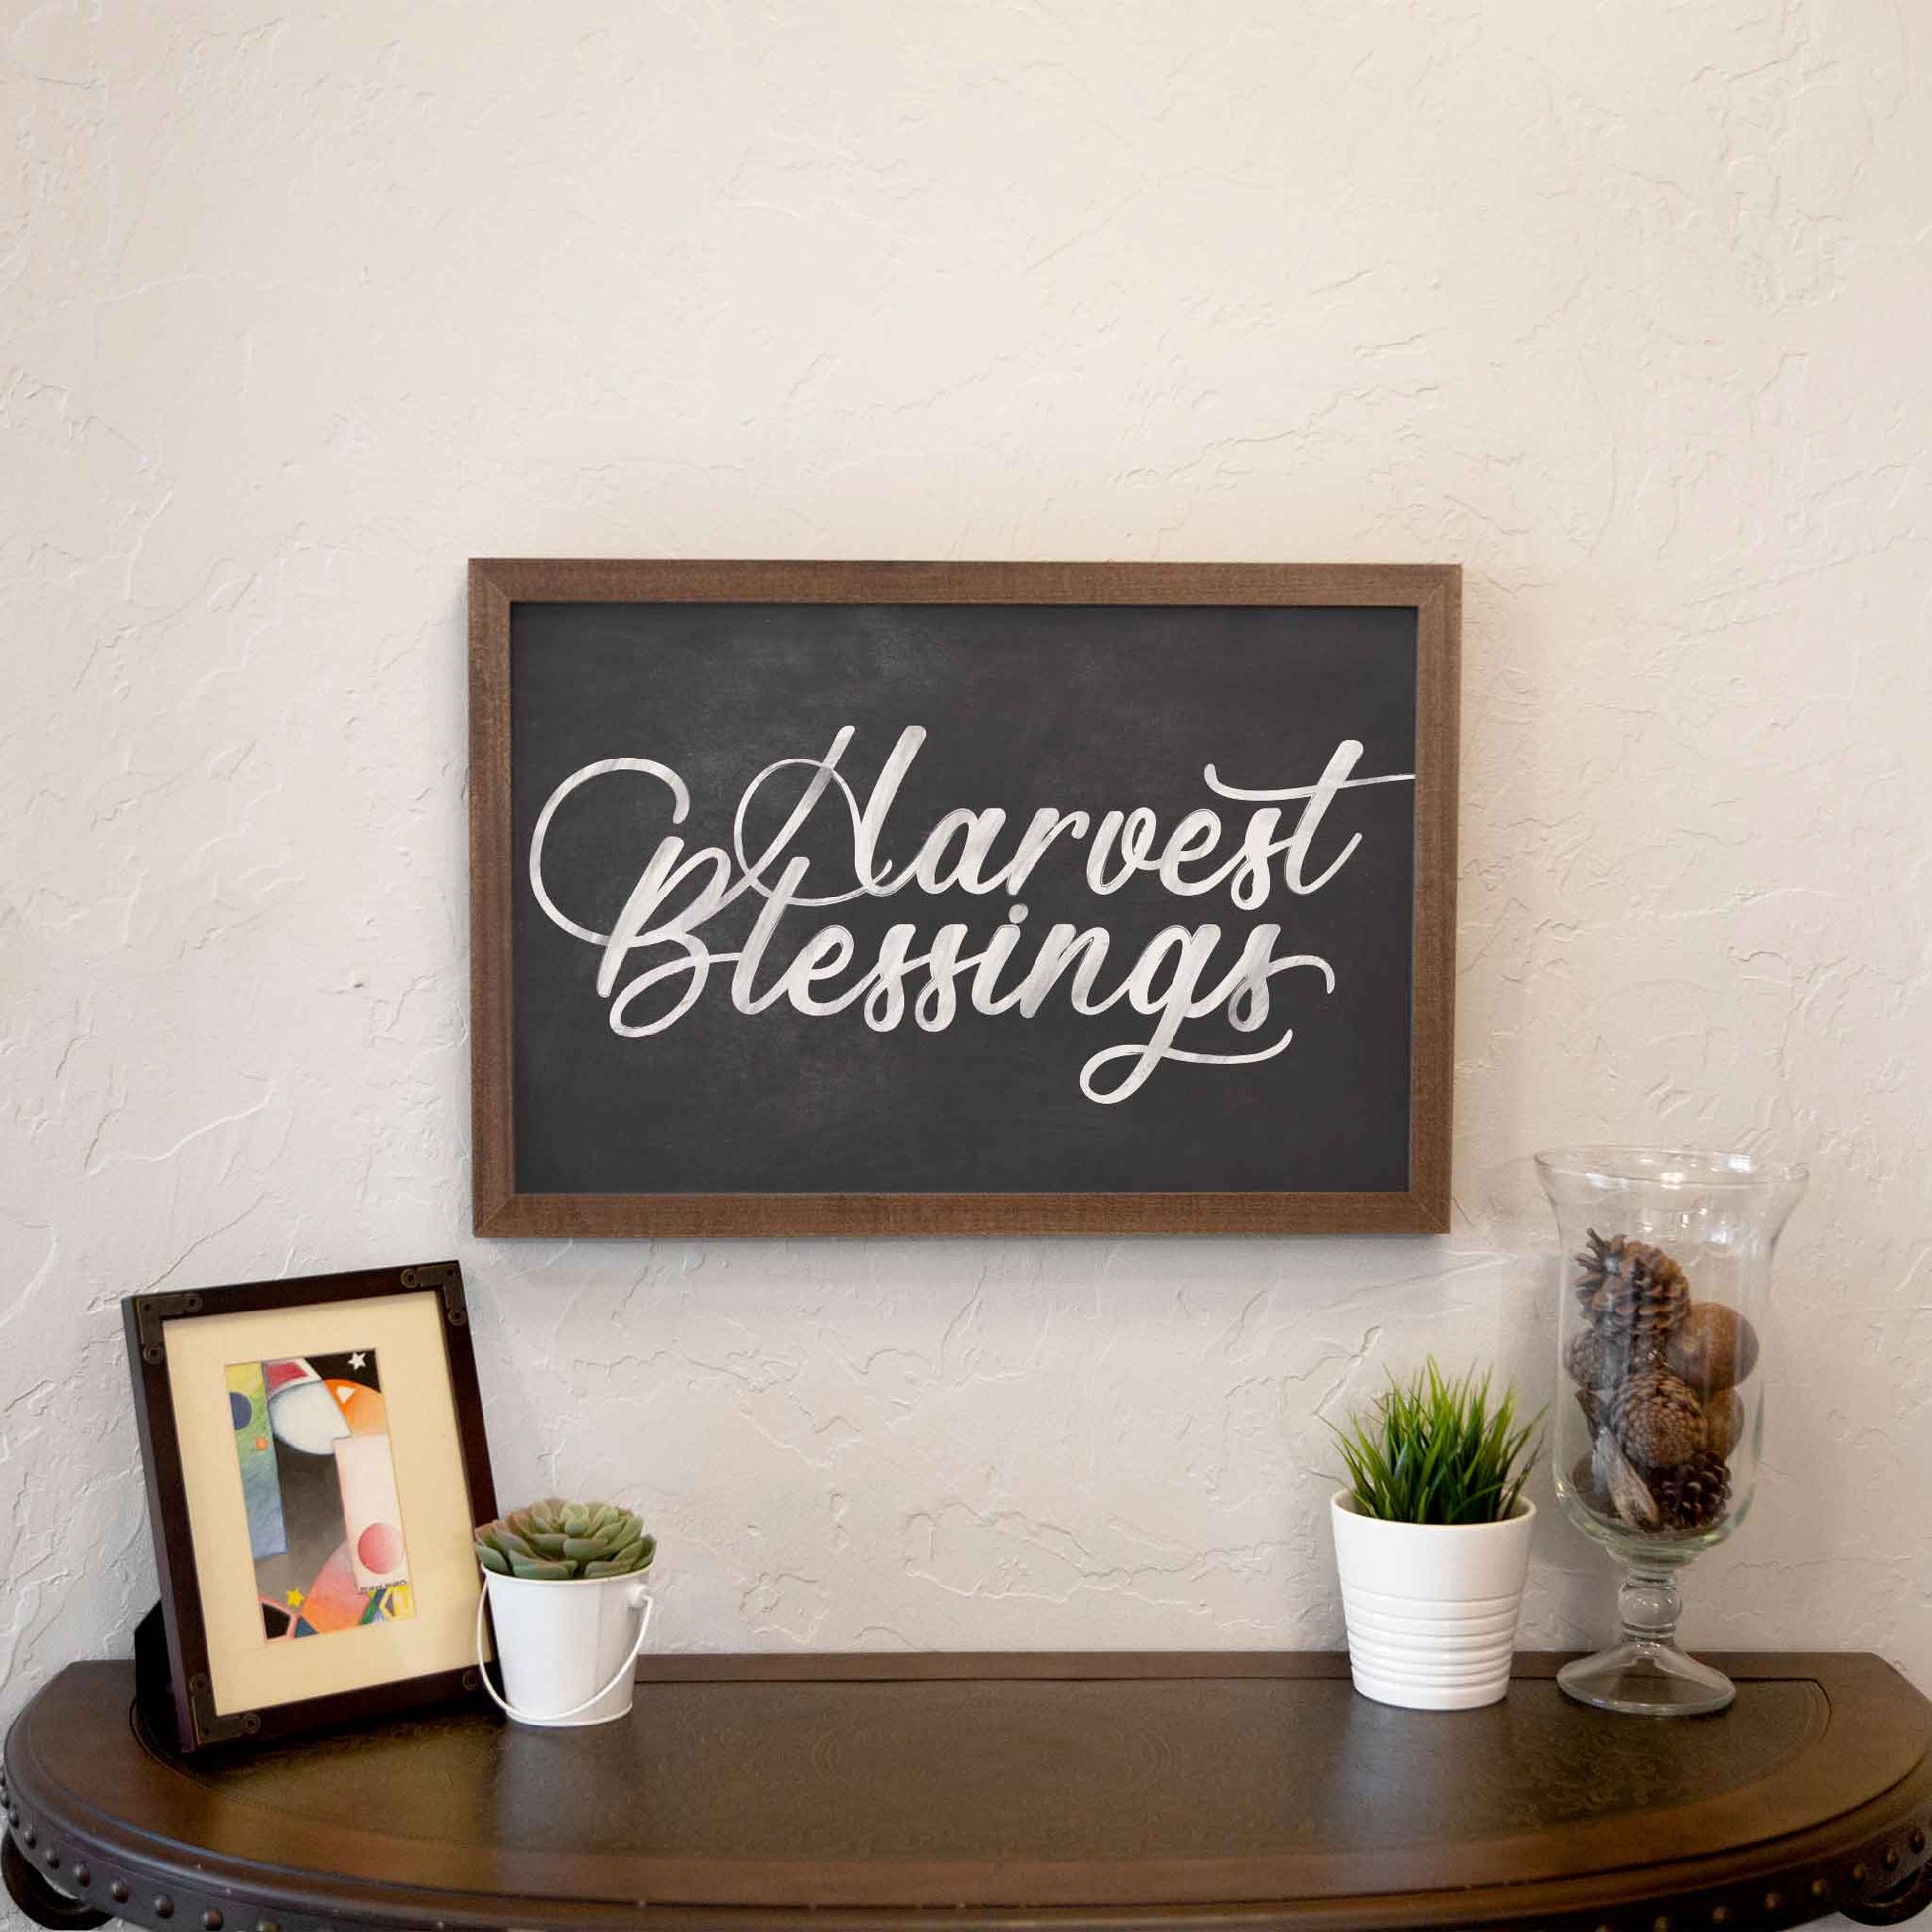 Smallwoods "Harvest Blessings" Sign with Wooden Frame